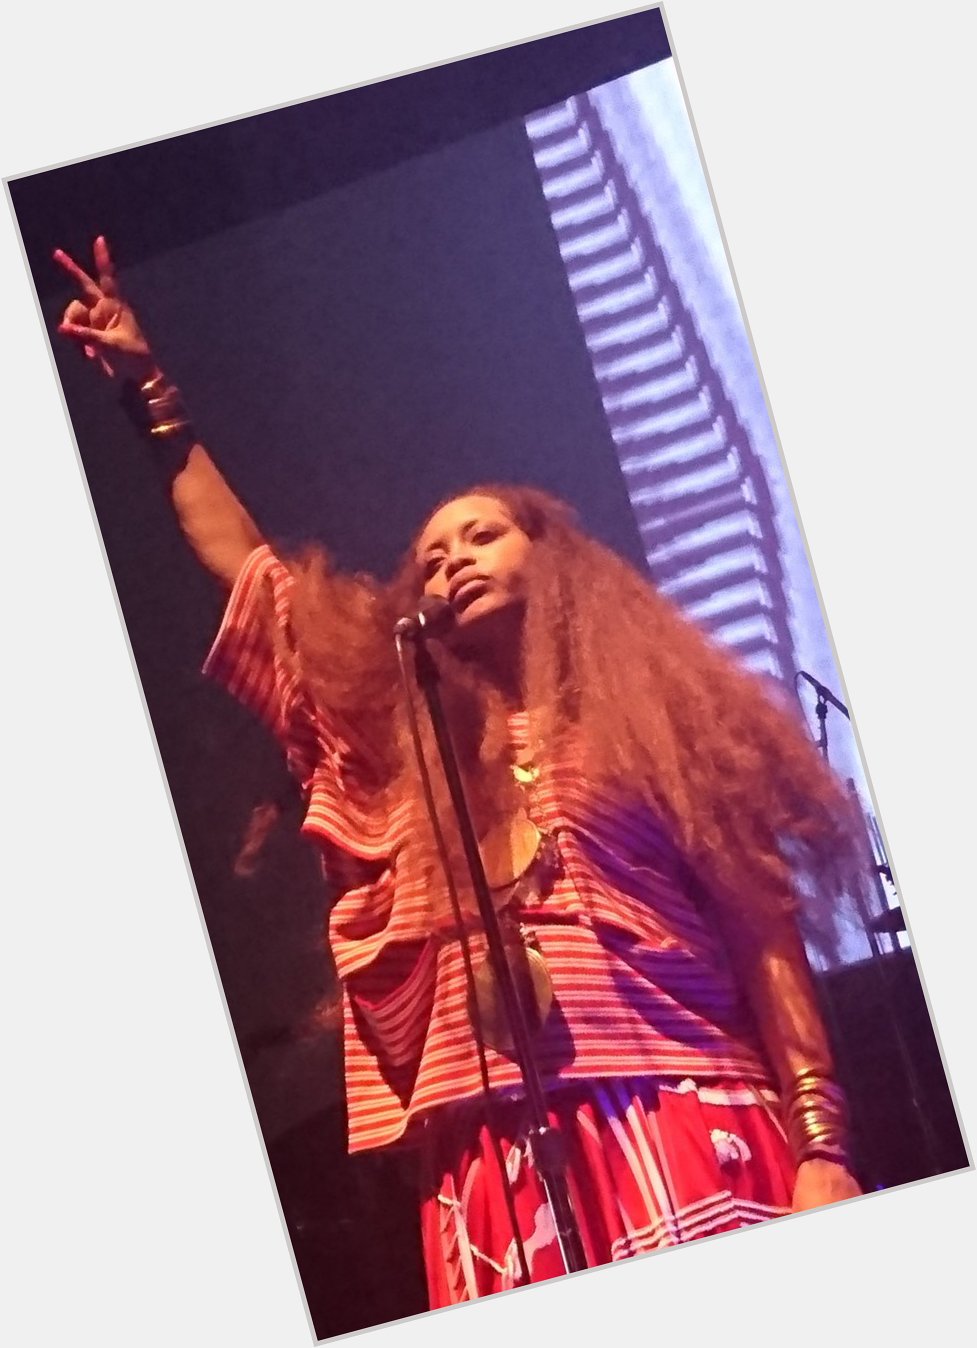 SOUL CAMP 2017             Happy 52nd Bday
my Queen, the one and only Erykah Badu. 